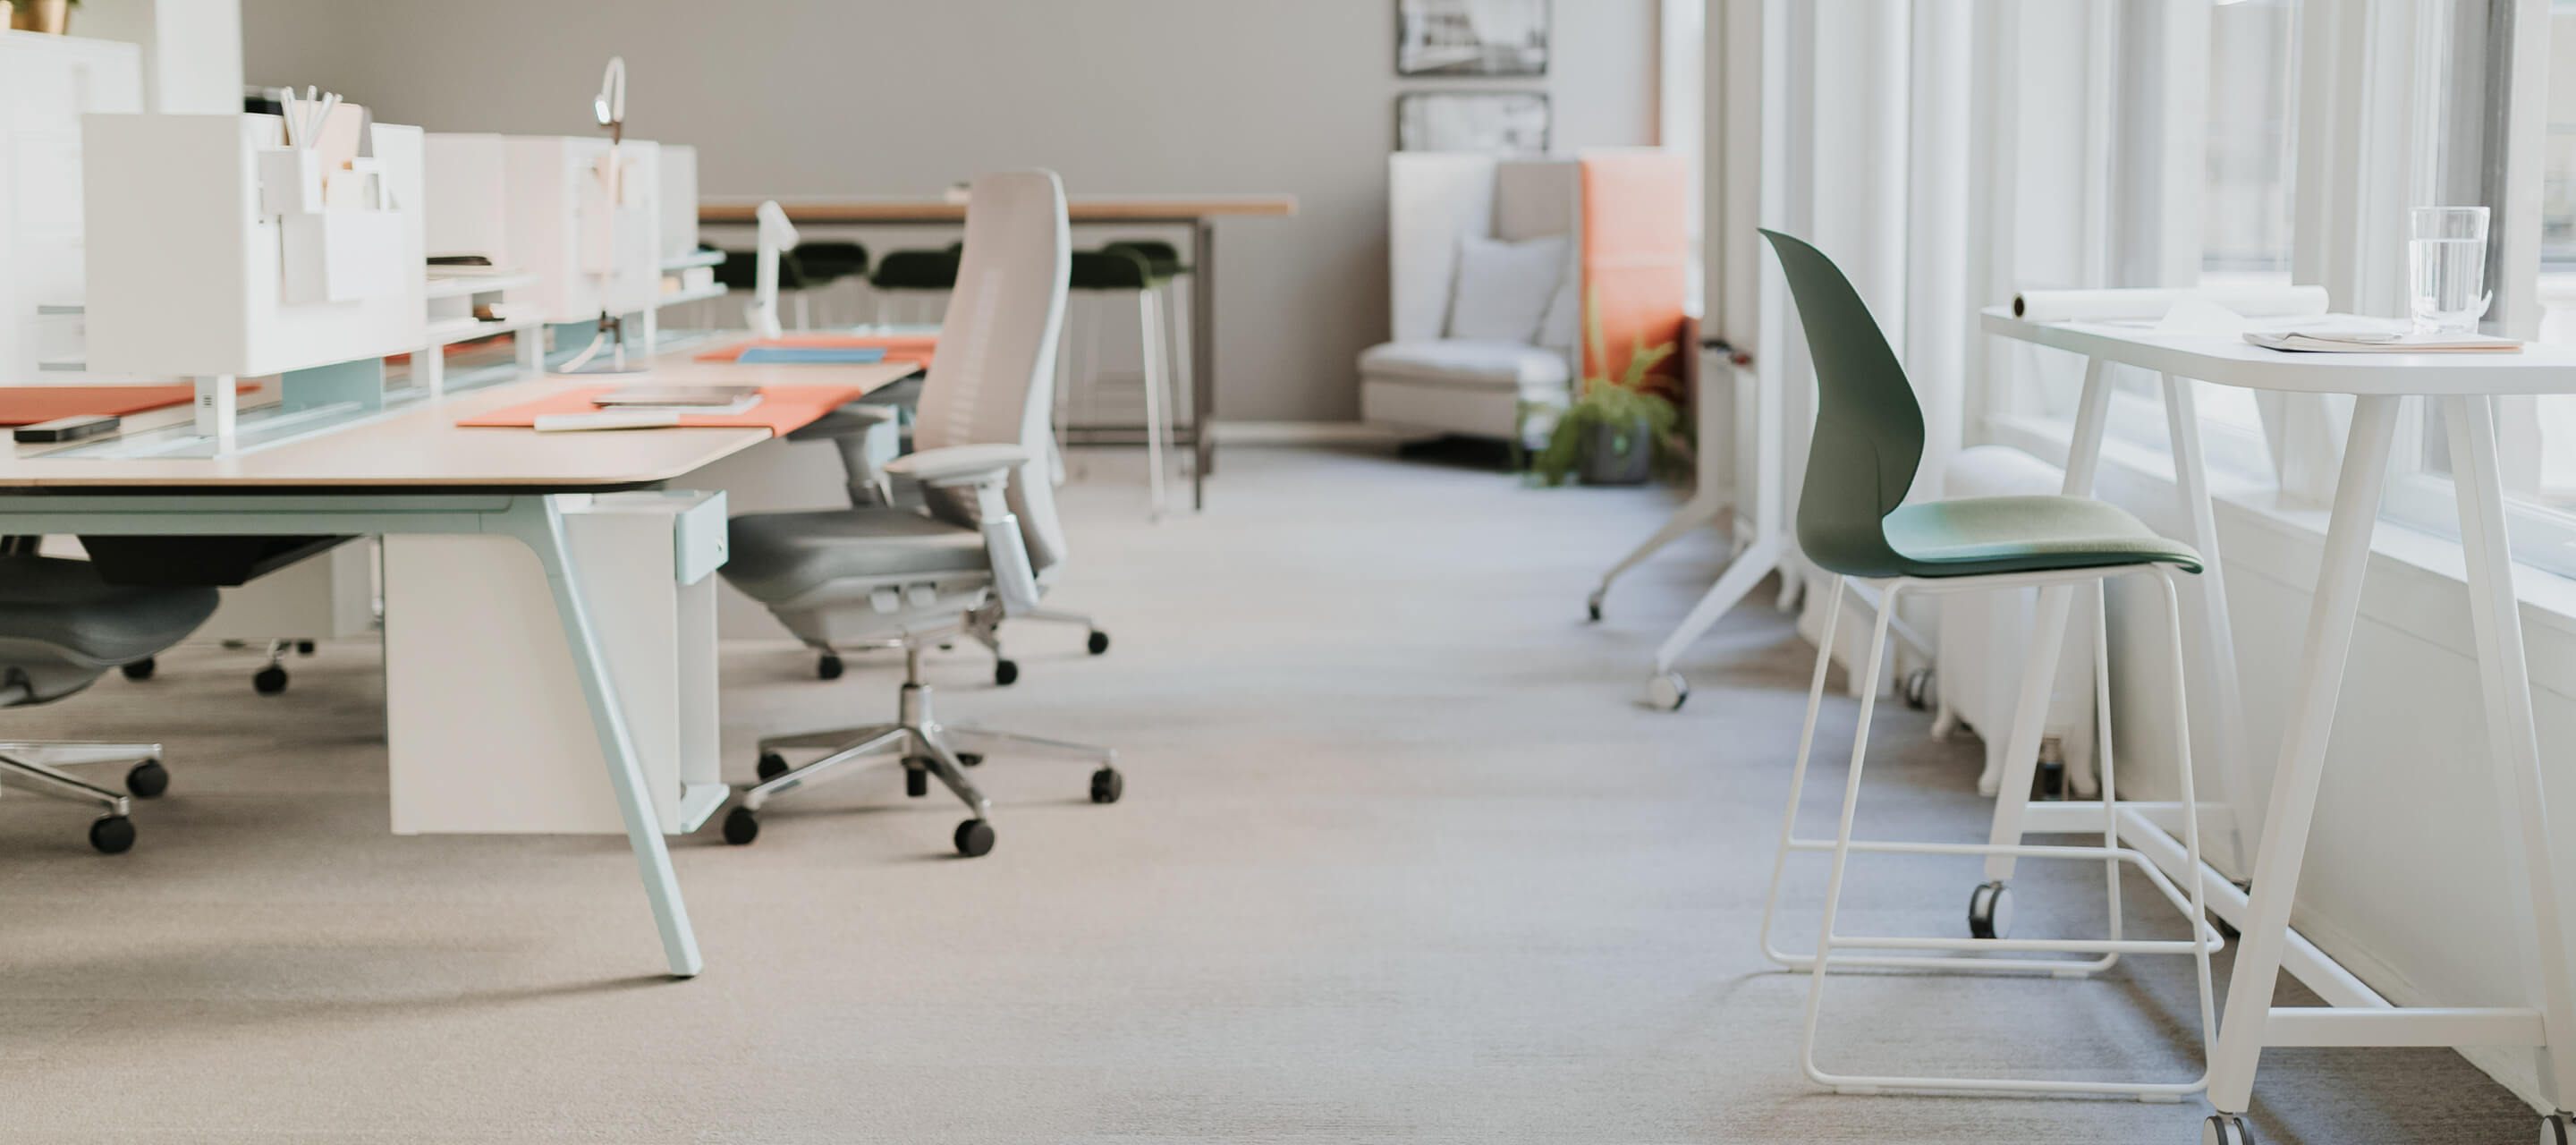 Individual workspace featuring a gray fern office chair  and maari chair with popup table/